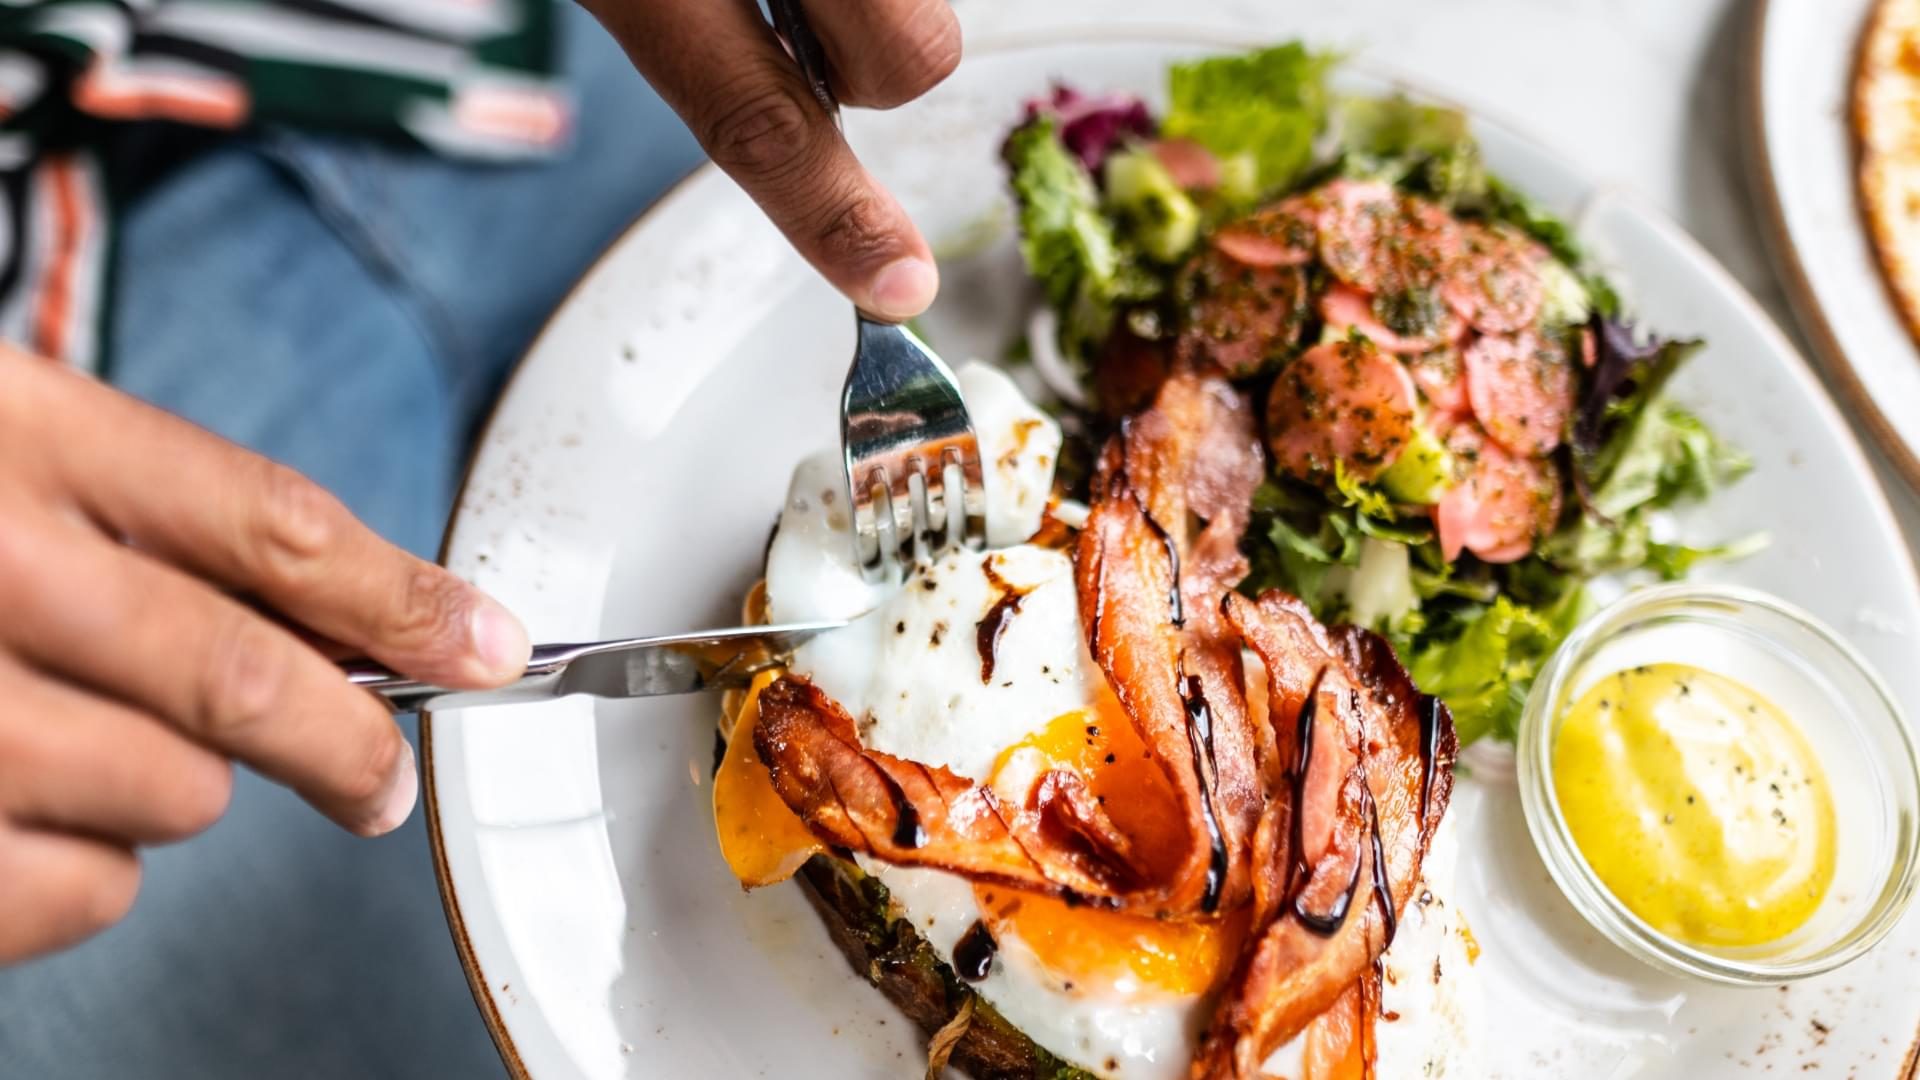 A loaded baked potato with fried egg and bacon and a salad.